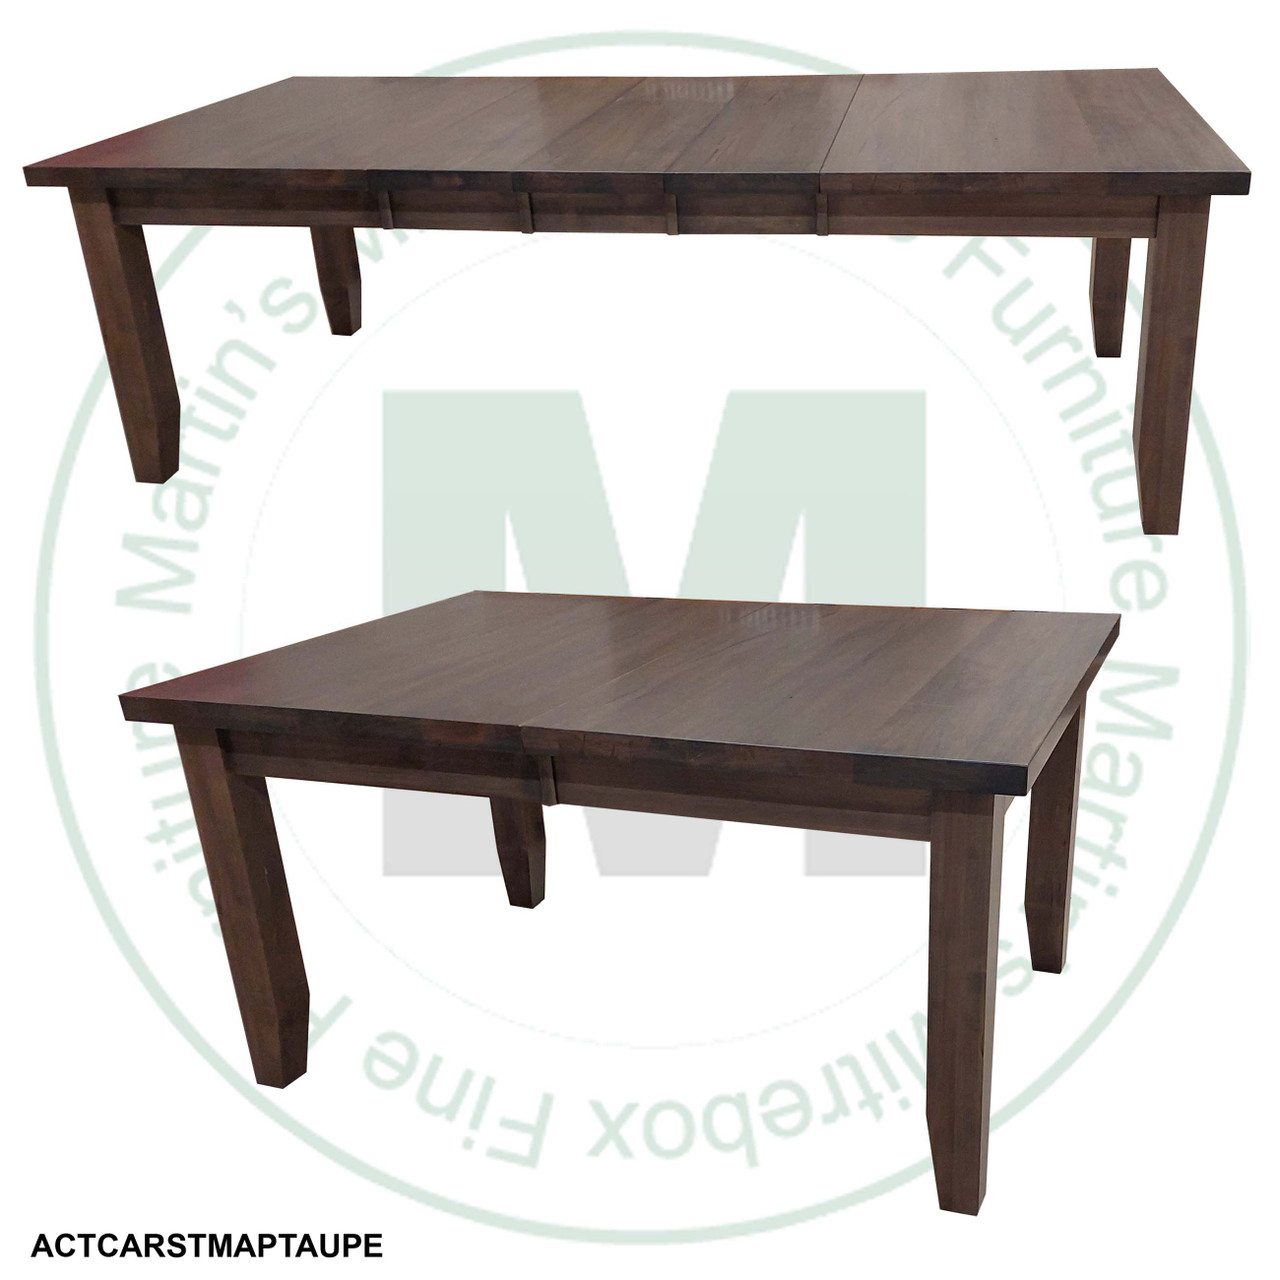 Oak Mansfield Extension Harvest Table 48''D x 48''W x 30''H With 3 - 12'' Leaves